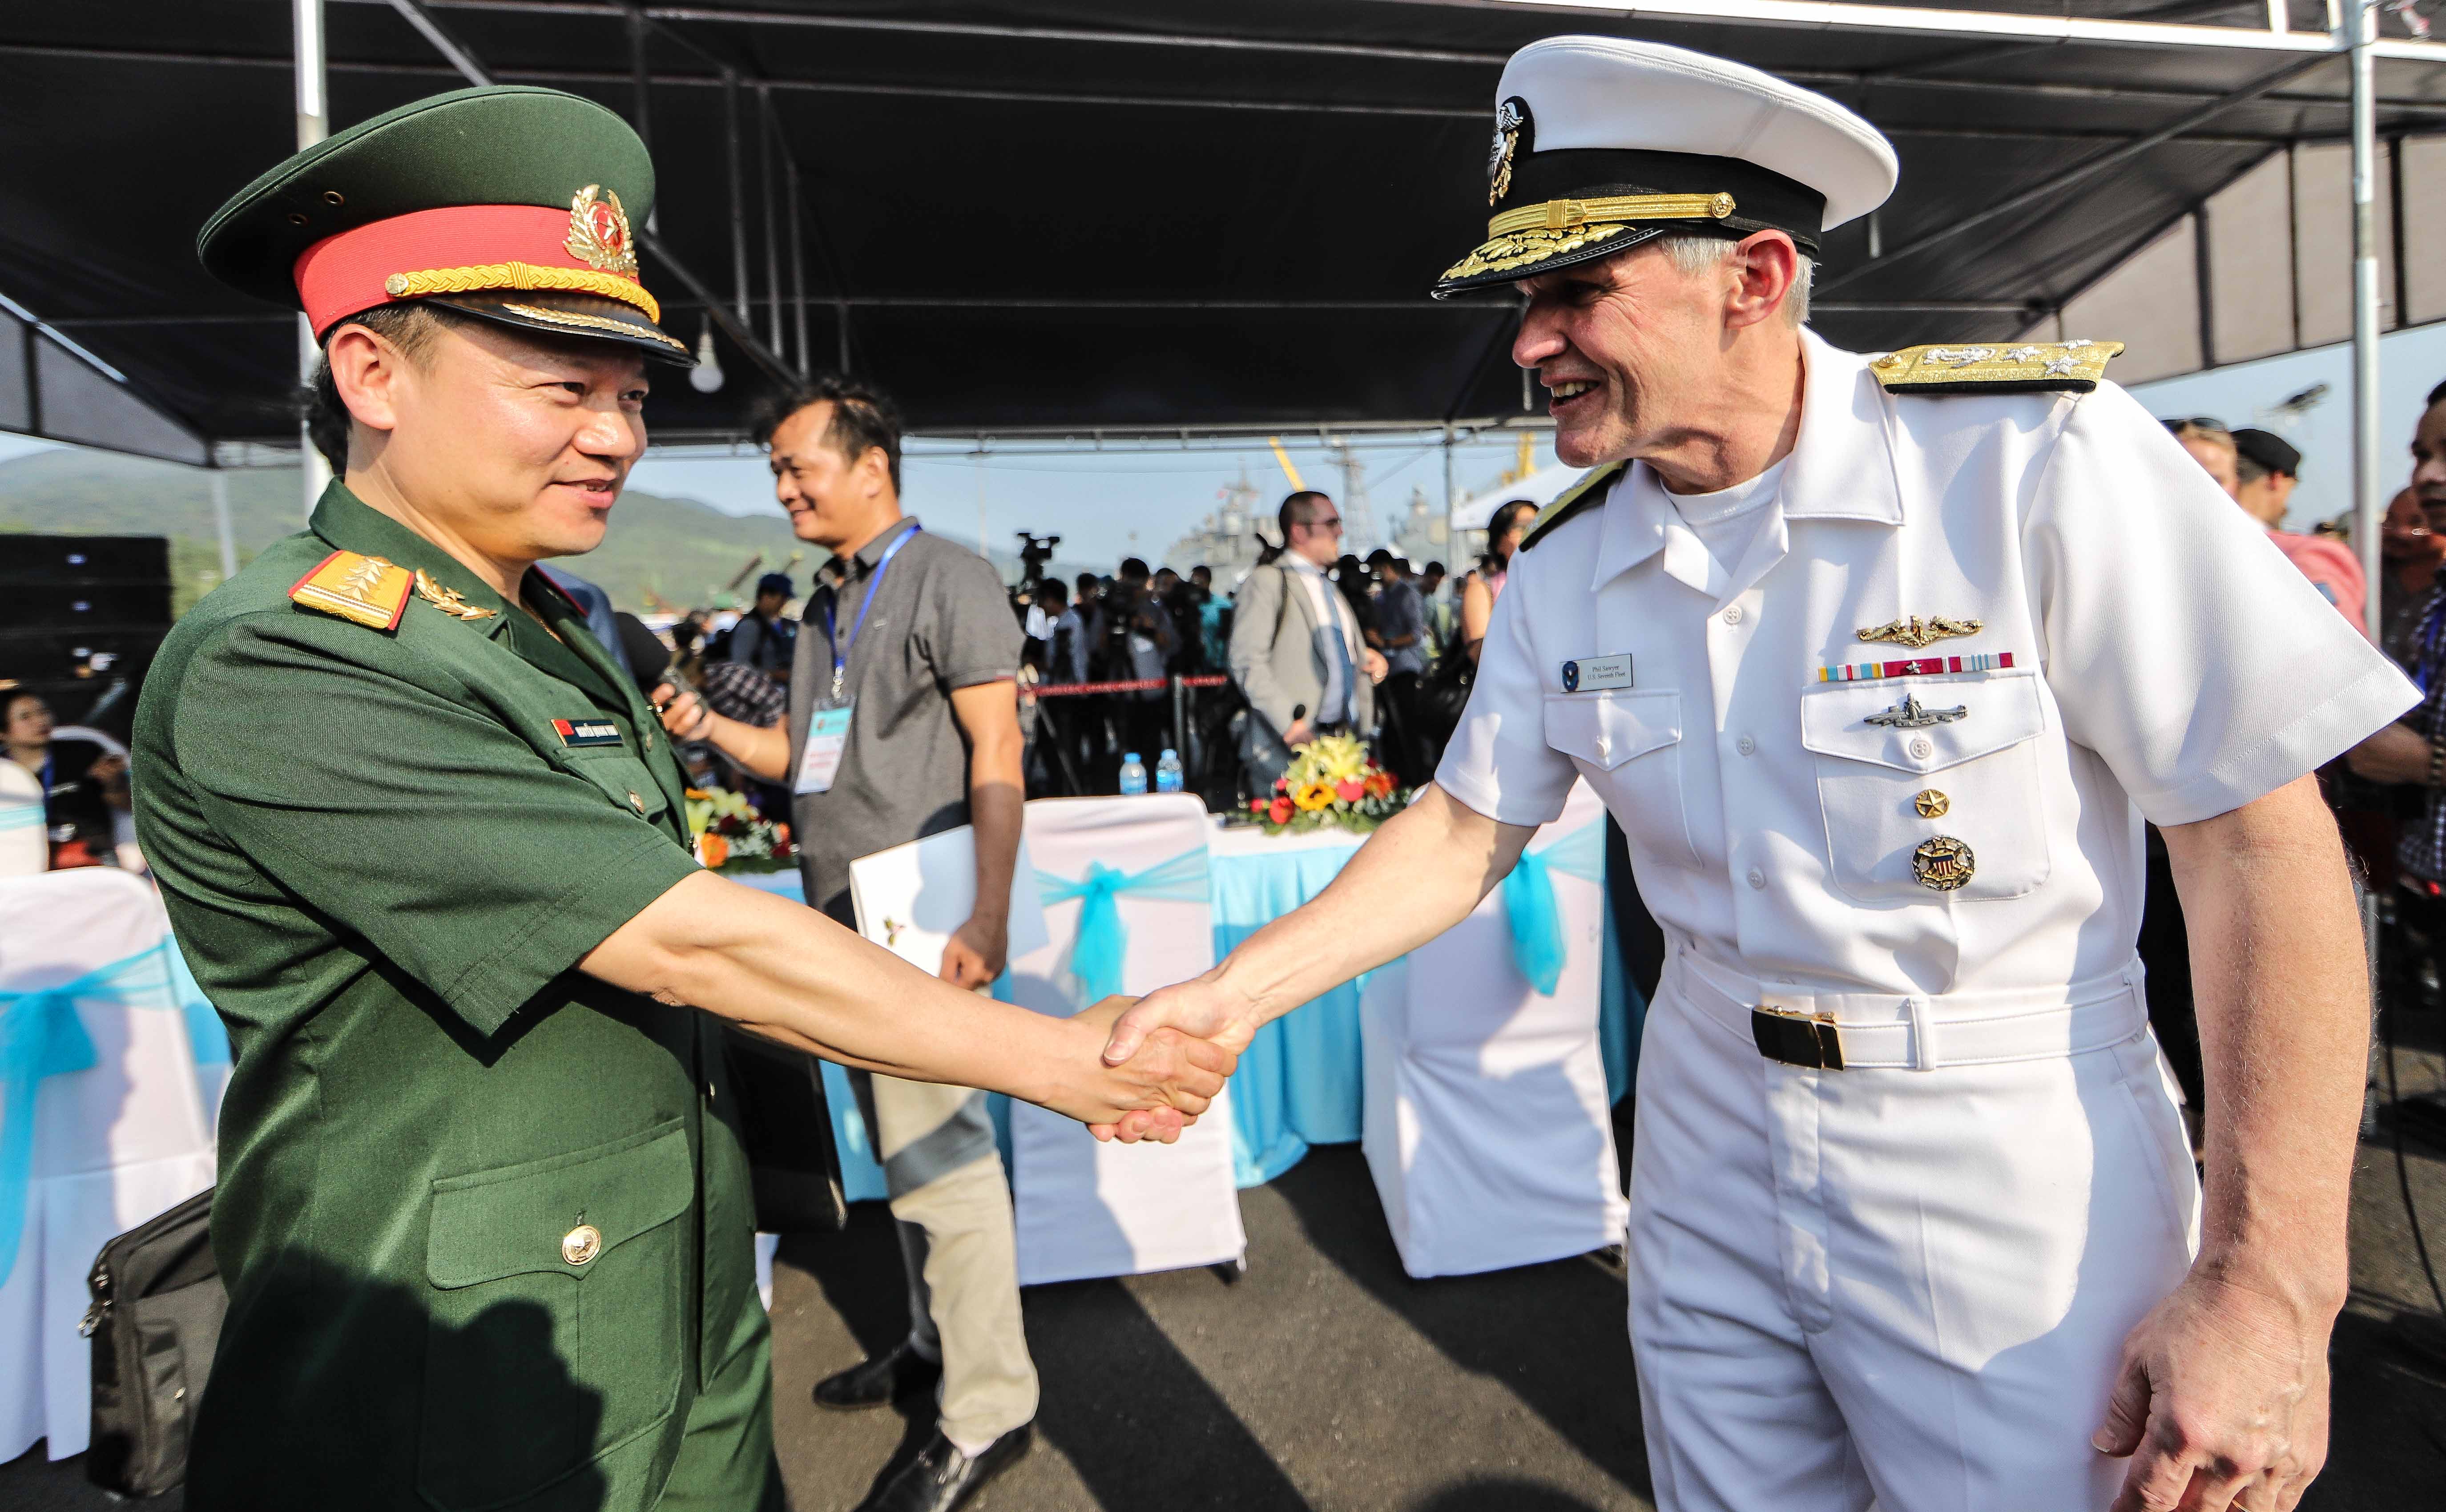 Colonel Nguyen Quang Vinh (left), deputy head of the Department of External Affairs, Ministry of Denfense, shakes hands with Vice Admiral Phillip Sawyer, Commander of the 7th fleet, US Navy, during a welcome ceremony at the Tien Sa Port, Da Nang, on March 5, 2018. Photo: Nguyen Khanh / Tuoi Tre